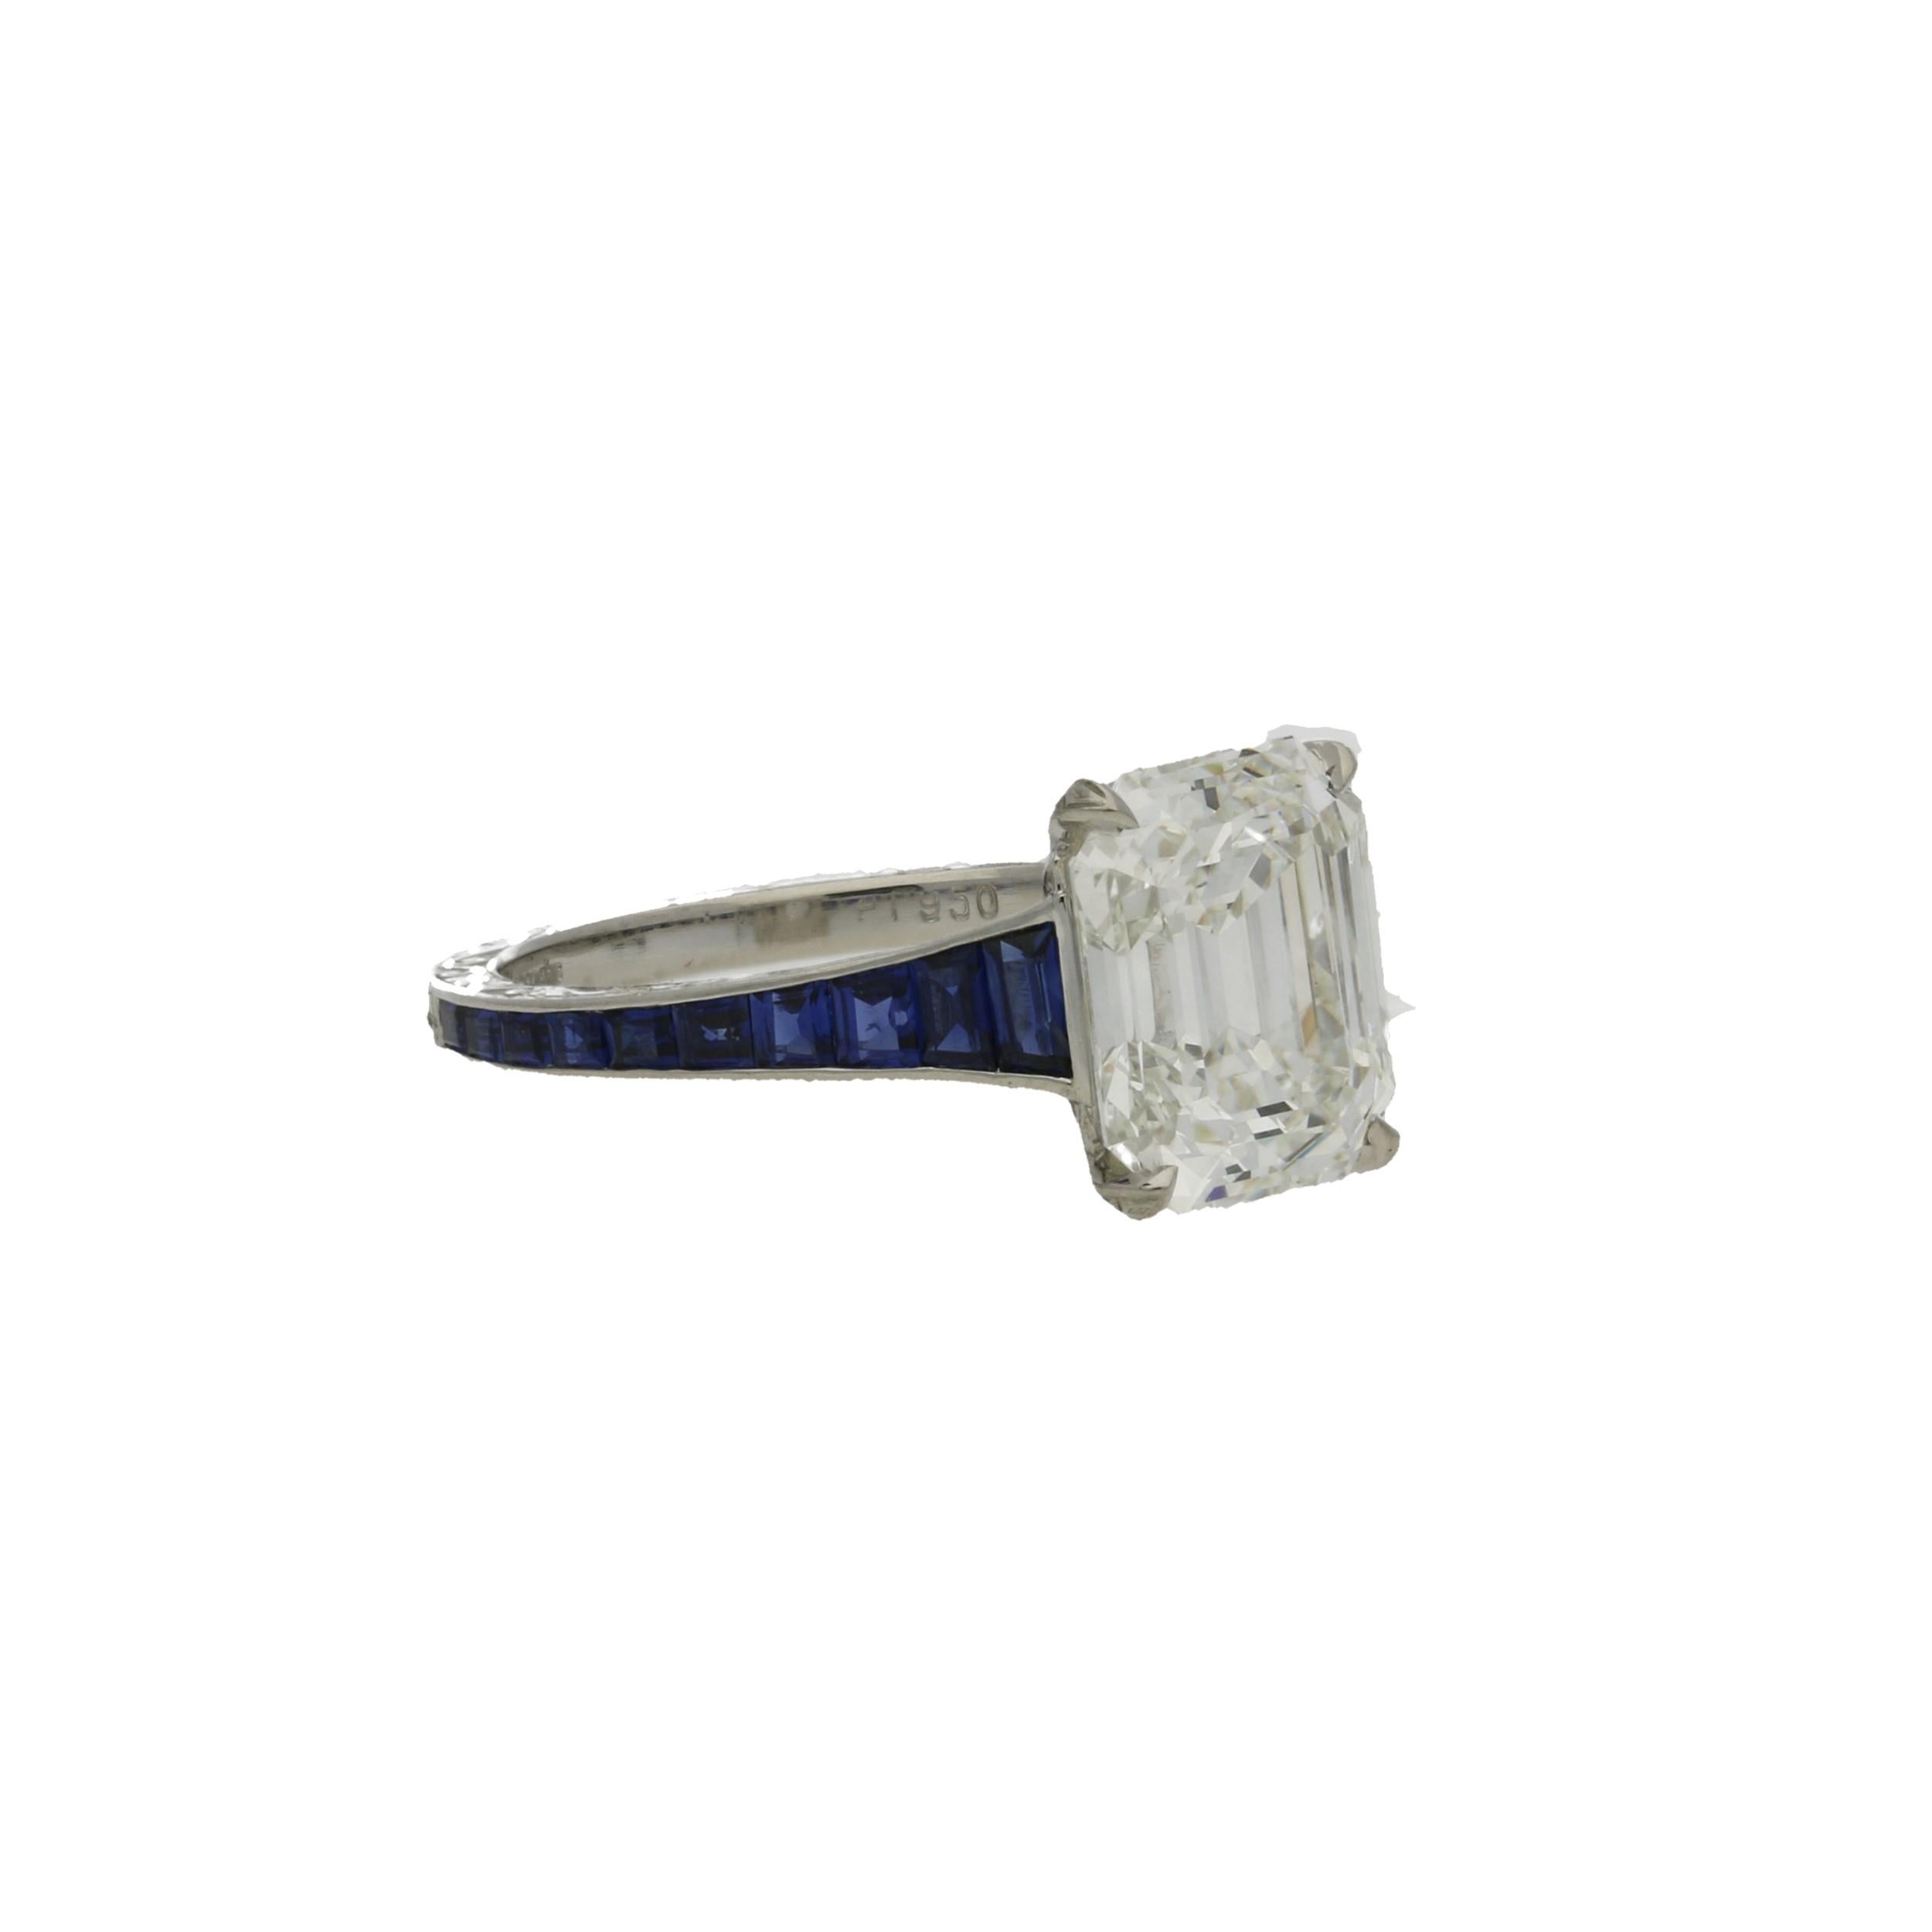 Beautiful Vintage emerald-cut diamond ring by Hancocks, centred on a 3.20 Carats Emerald-cut diamond of H colour and VVS1 clarity, claw set in a hand made platinum mount decorated with ornate hand engraved scroll motifs, the finely tapering band